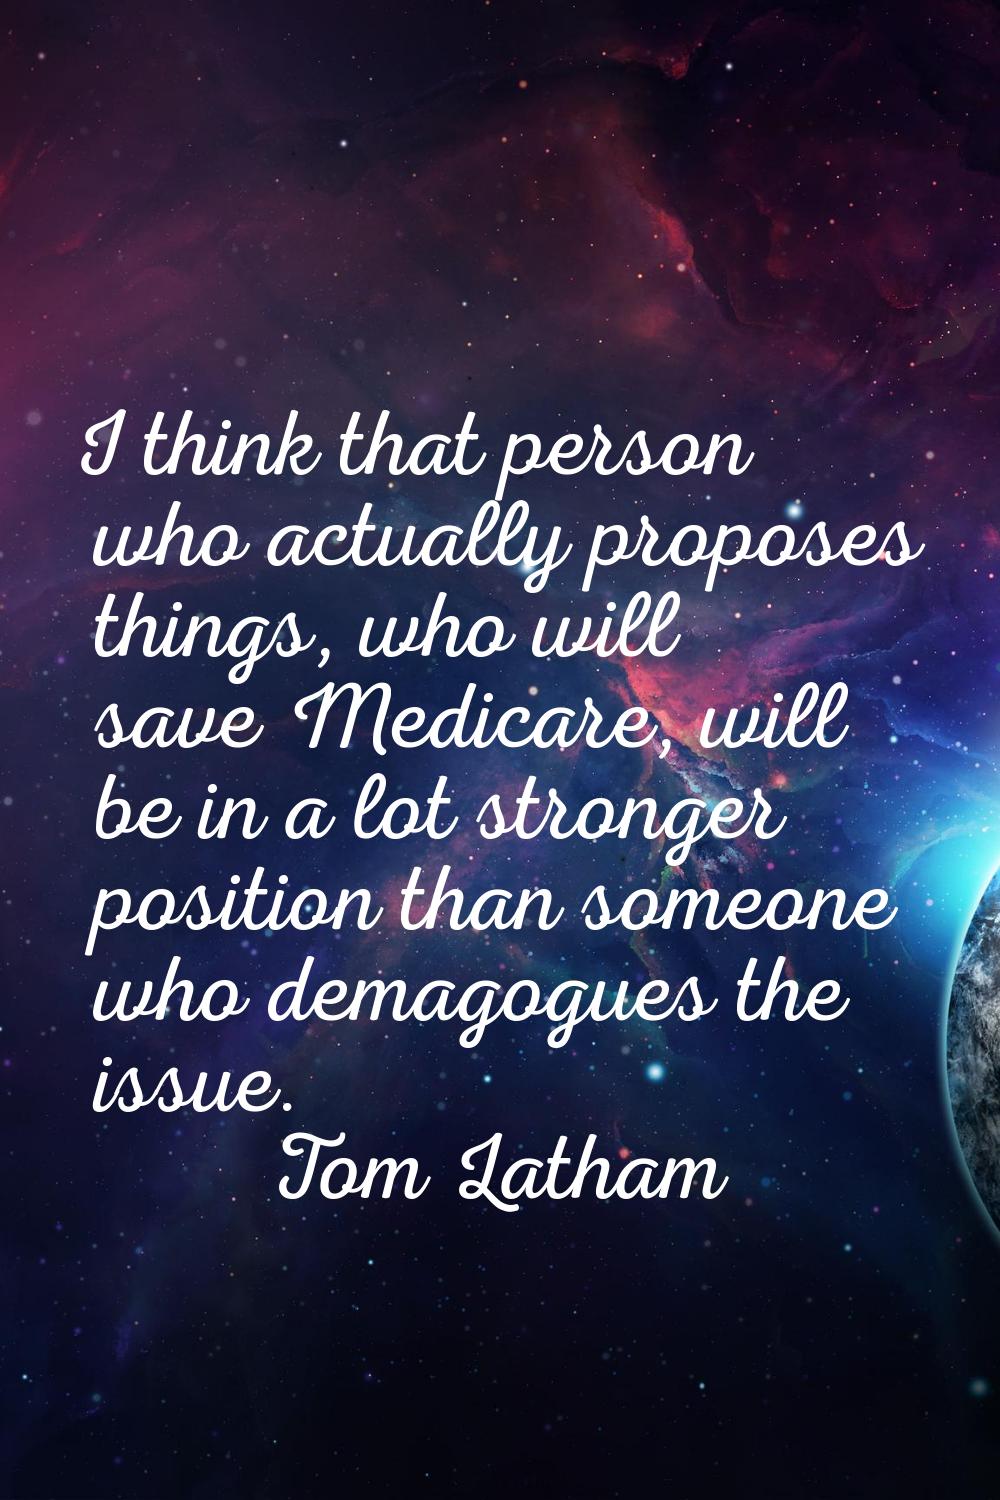 I think that person who actually proposes things, who will save Medicare, will be in a lot stronger